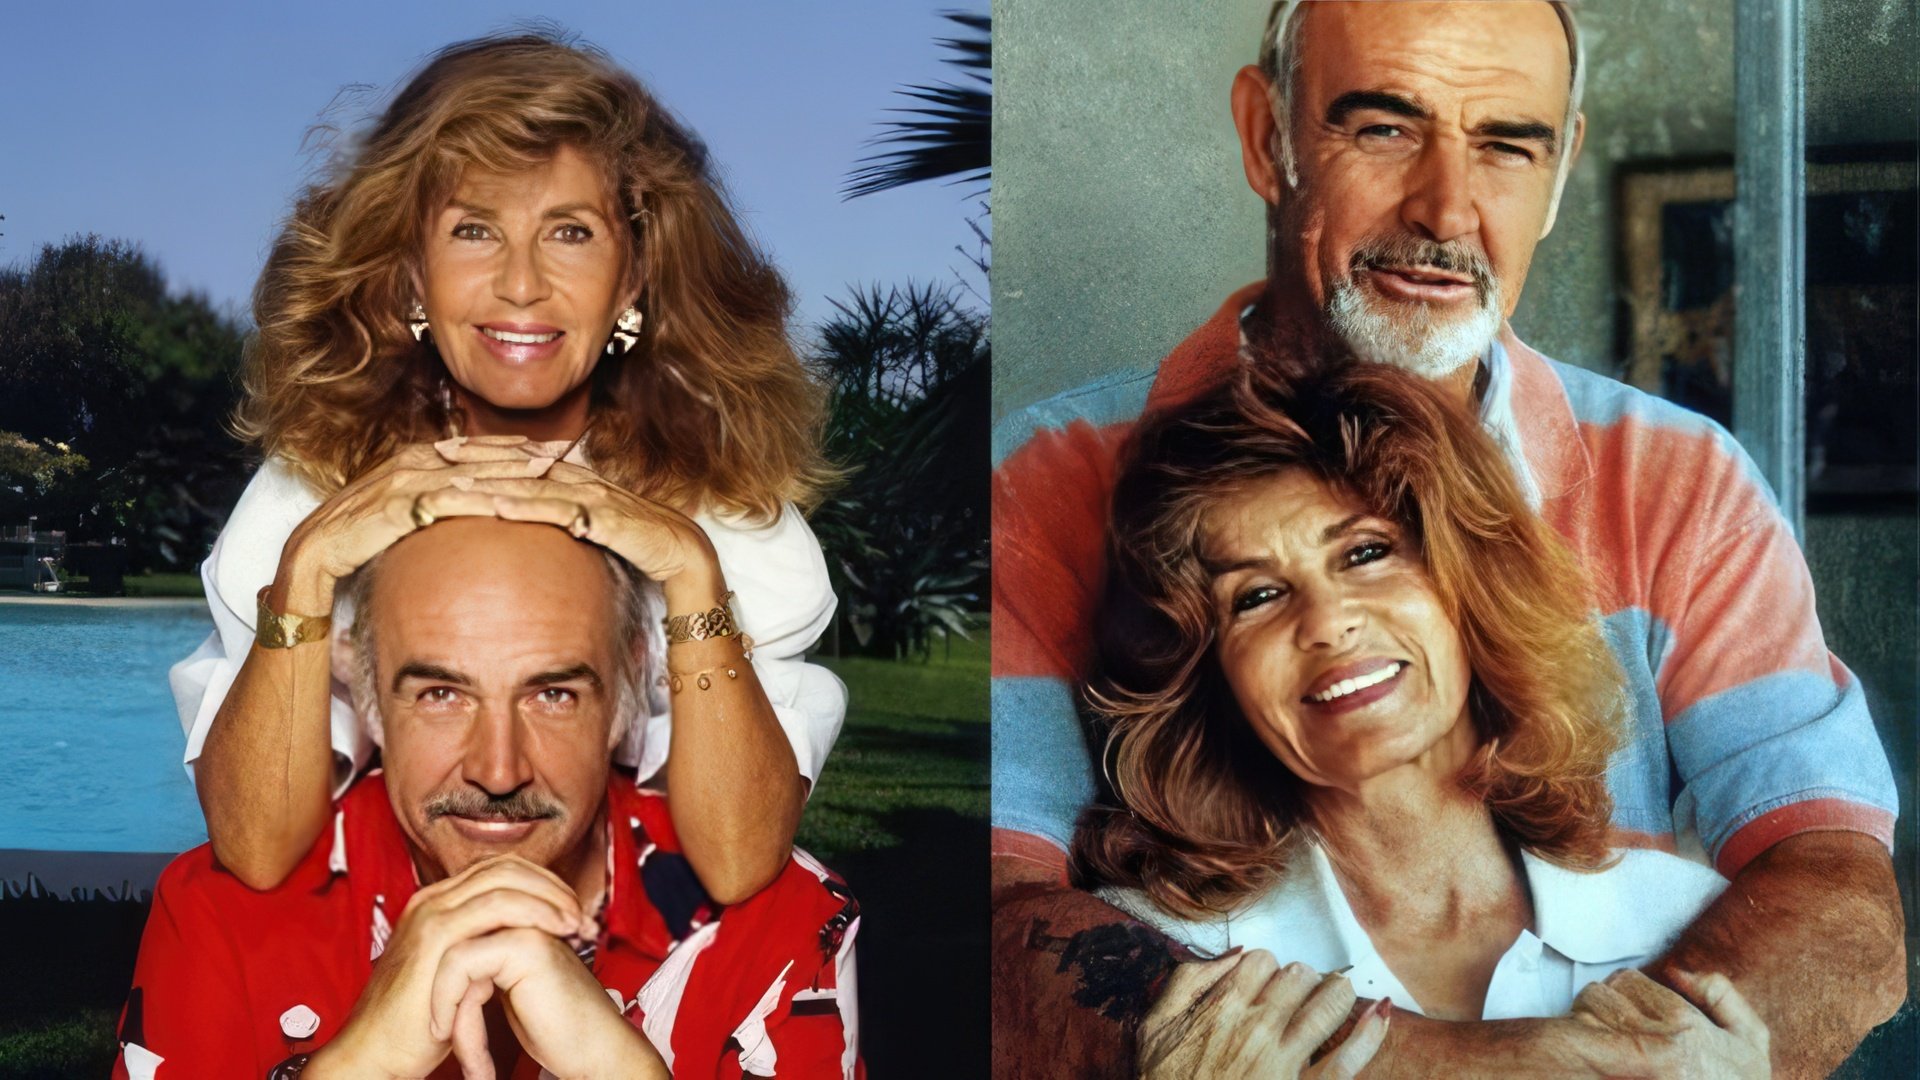 Sean Connery and Micheline Roquebrune